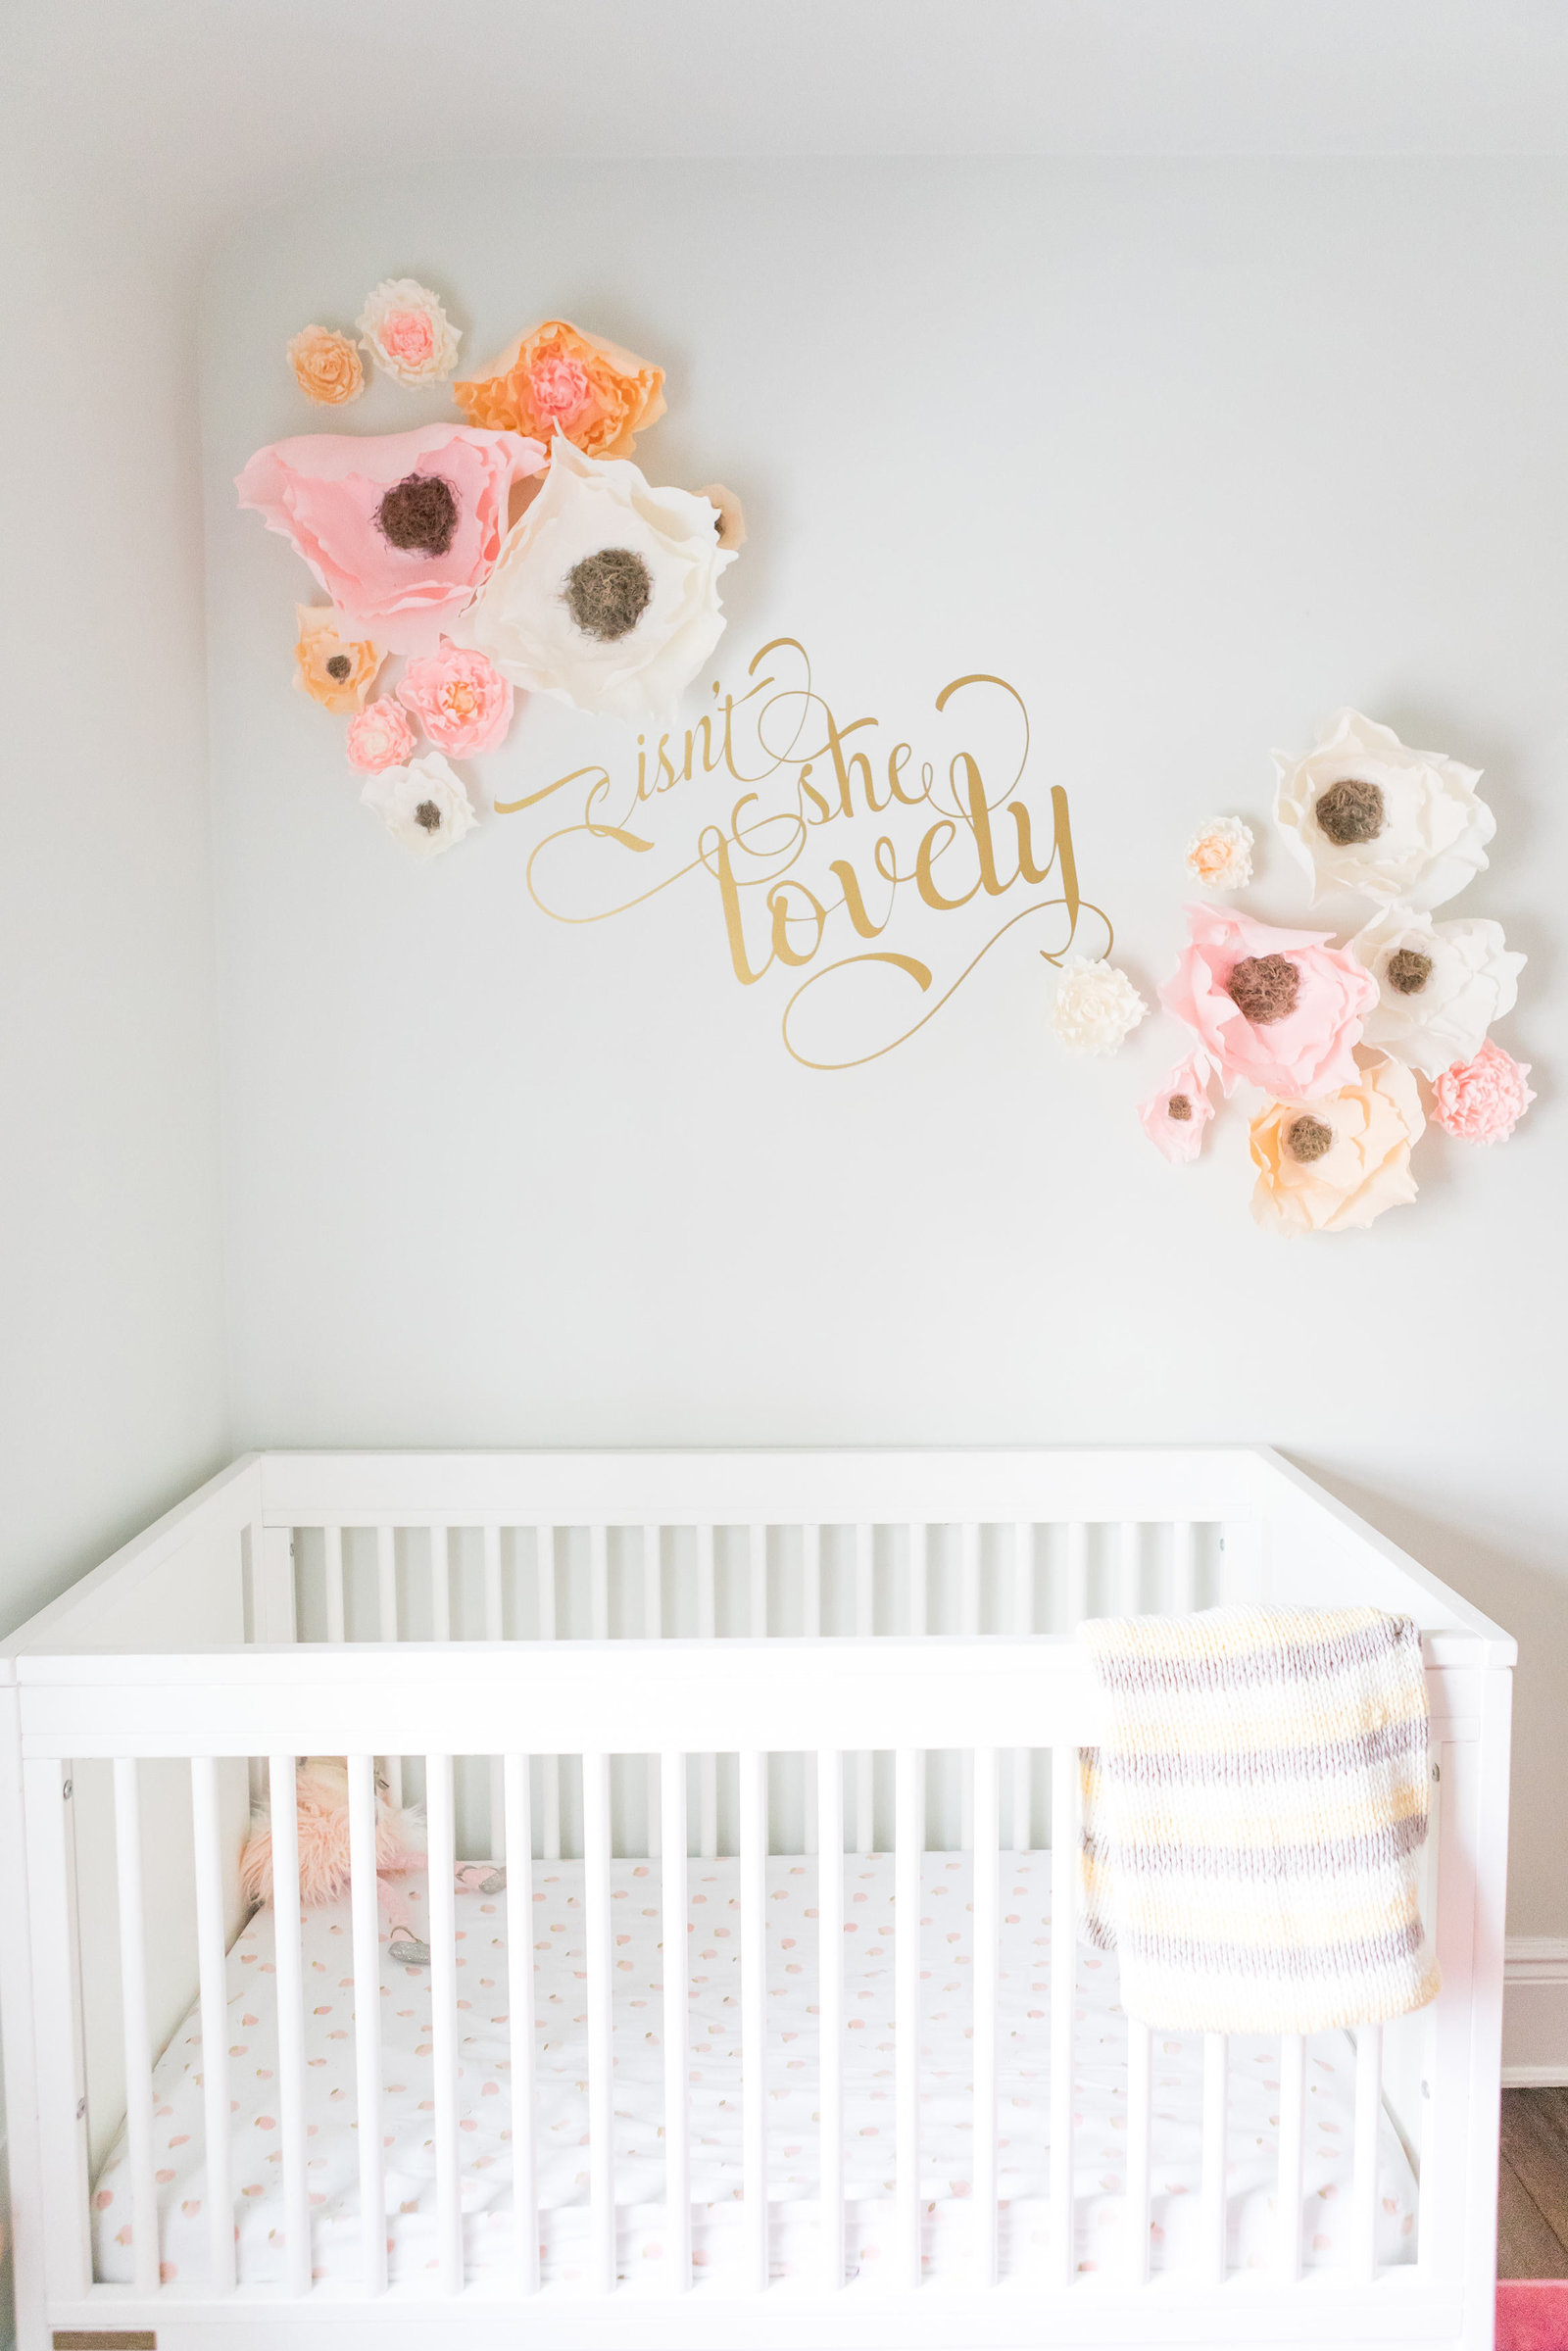 A crib with 3D paper flowers and gold quote.